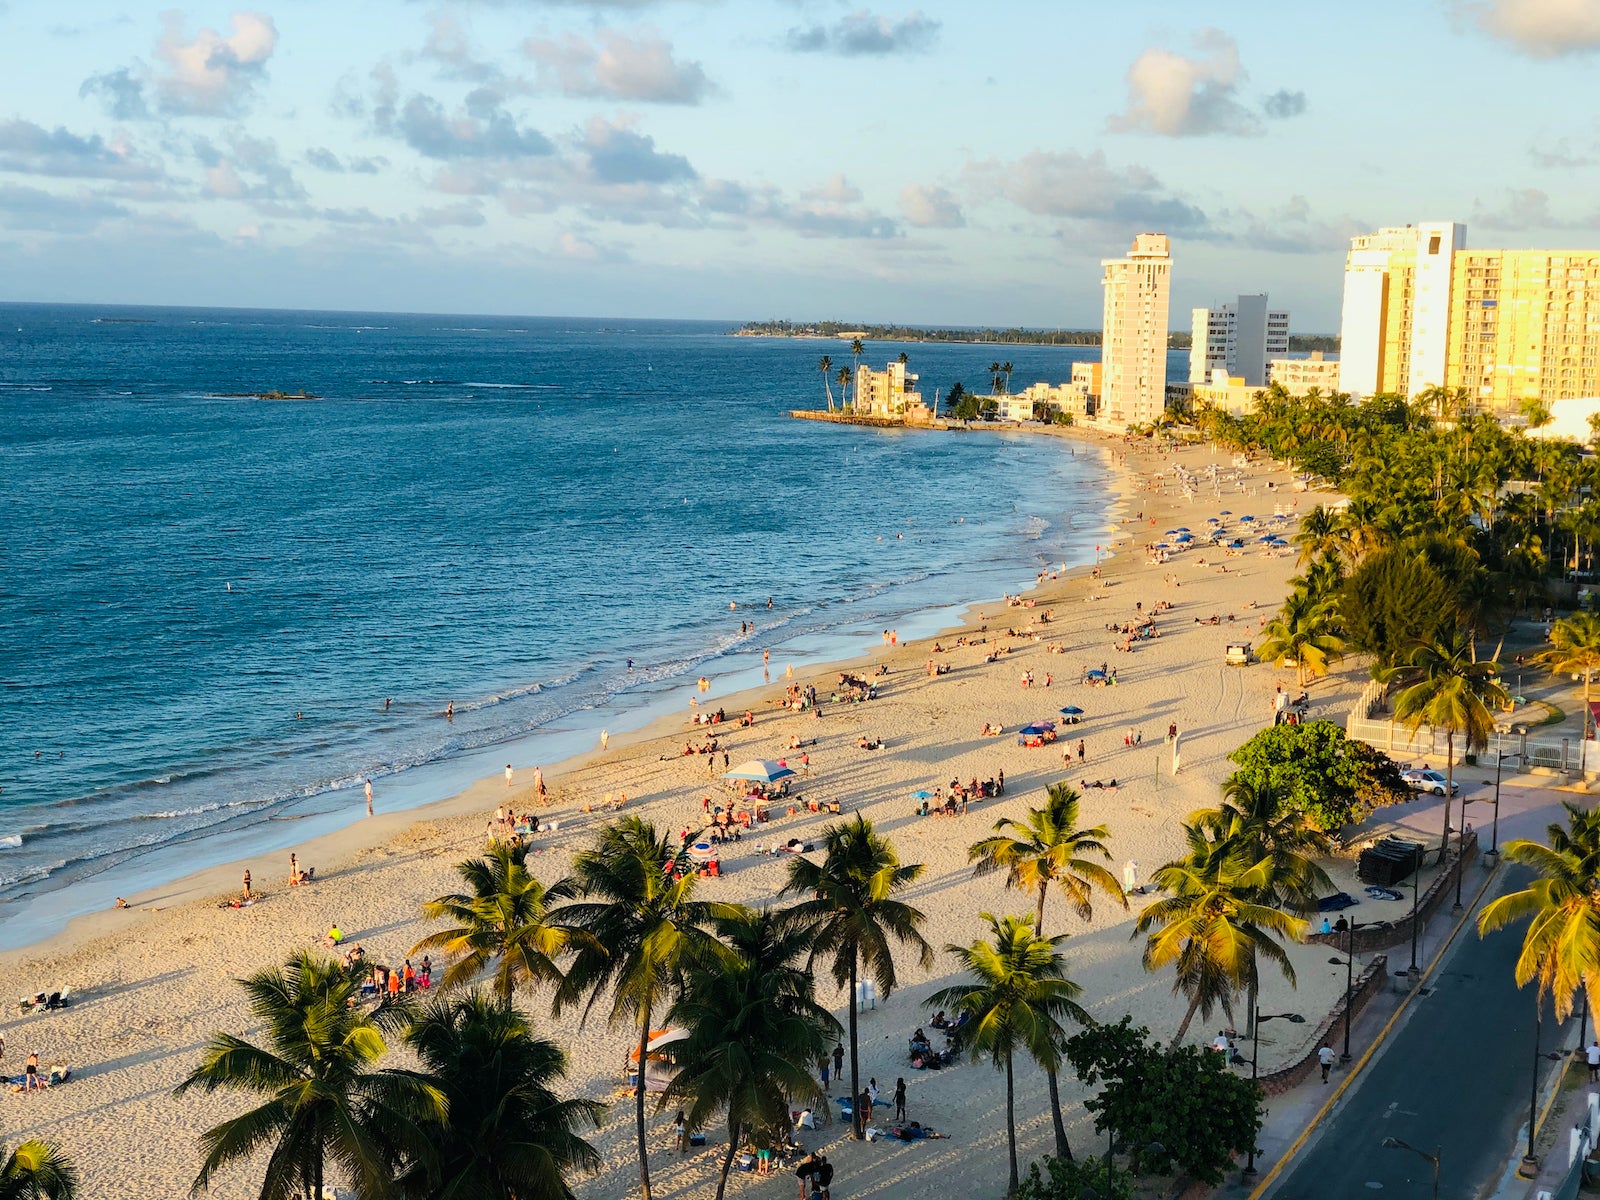 Get tickets to Puerto Rico from multiple US cities for as low as $188